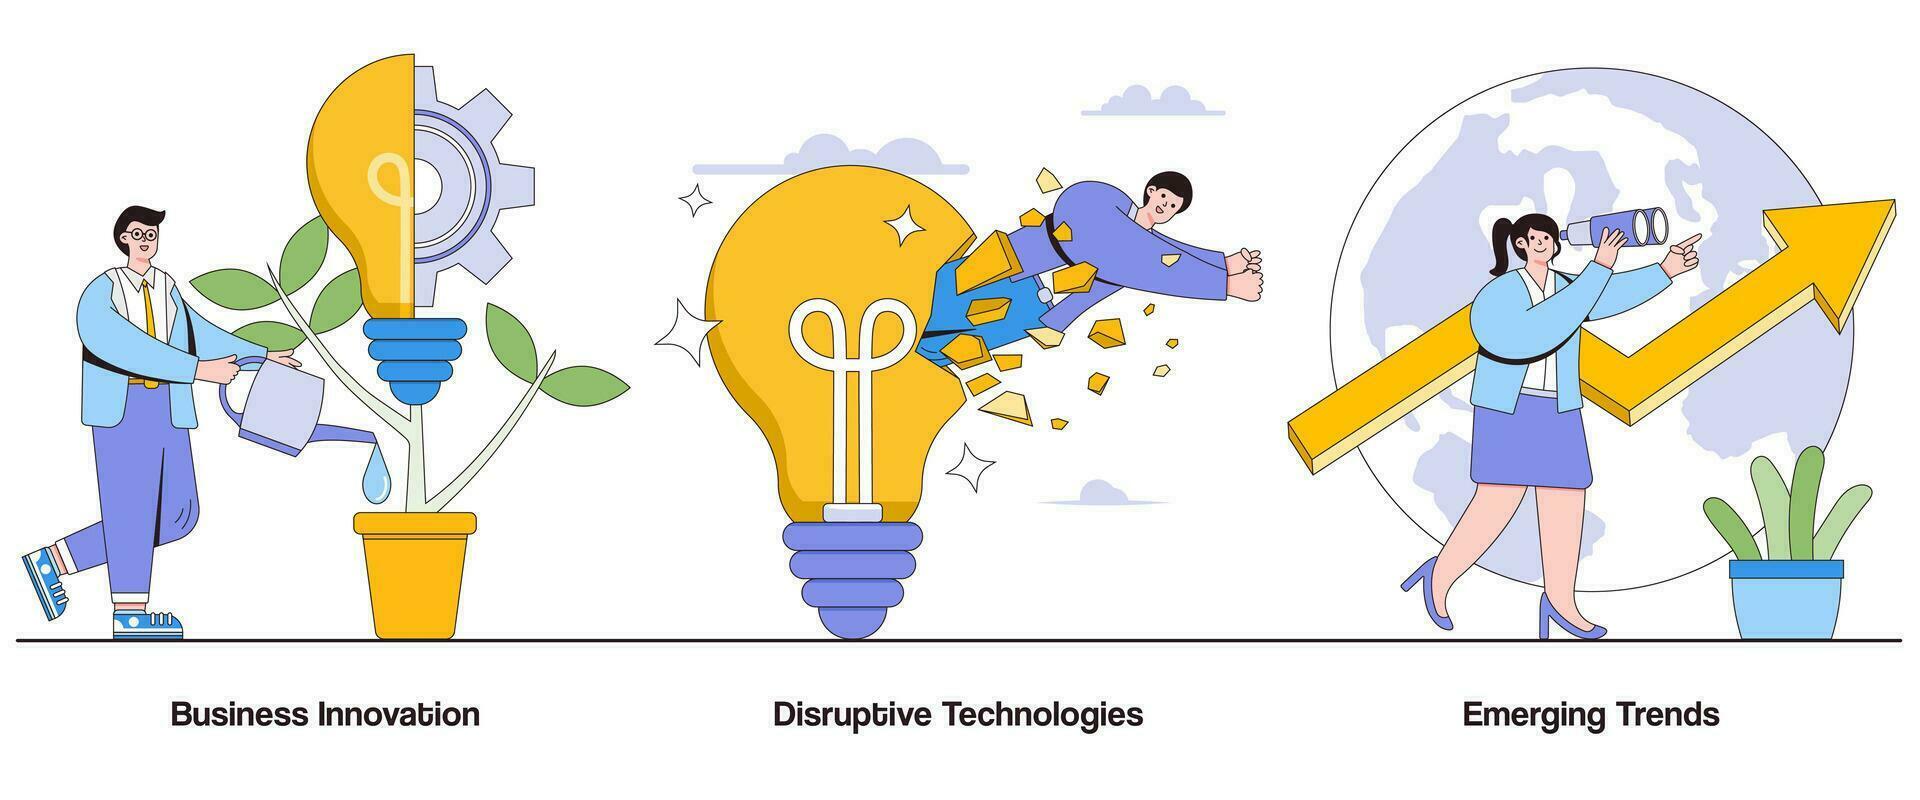 Business innovation, disruptive technologies, emerging trends concept with character. Innovation ecosystem abstract vector illustration set. Technology adoption, market disruption, forward-thinking